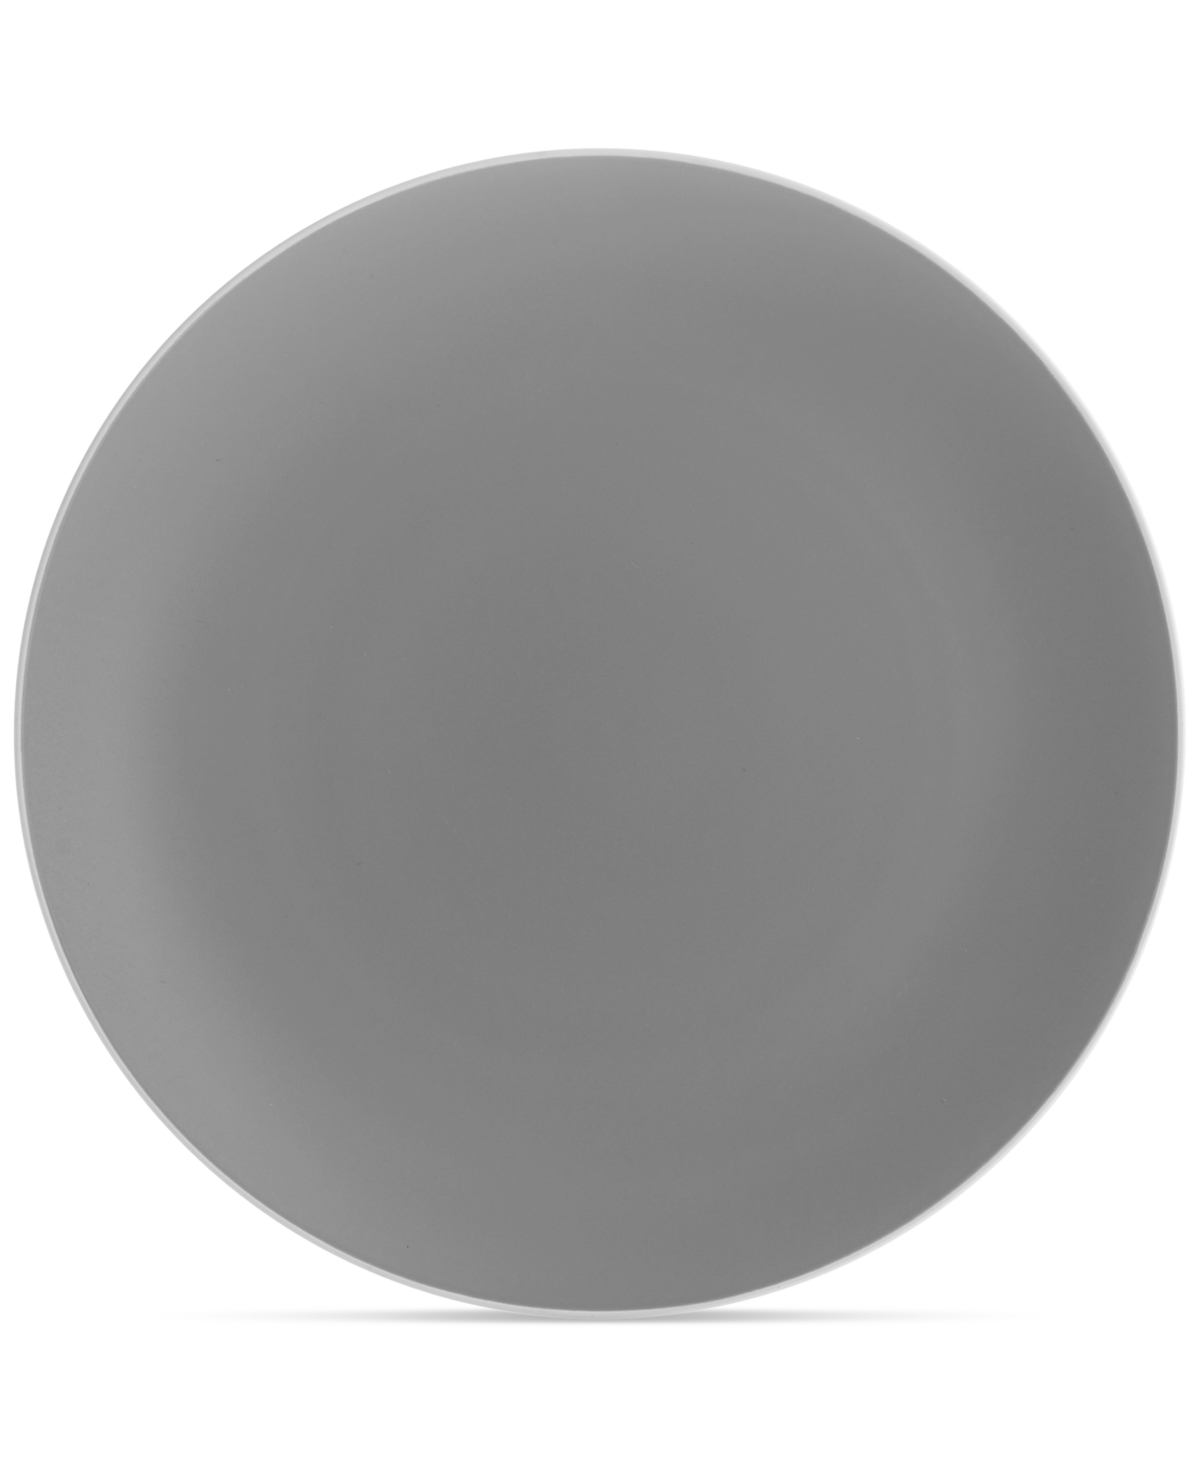 Pop Collection by Robin Levien Dinner Plate - Slate